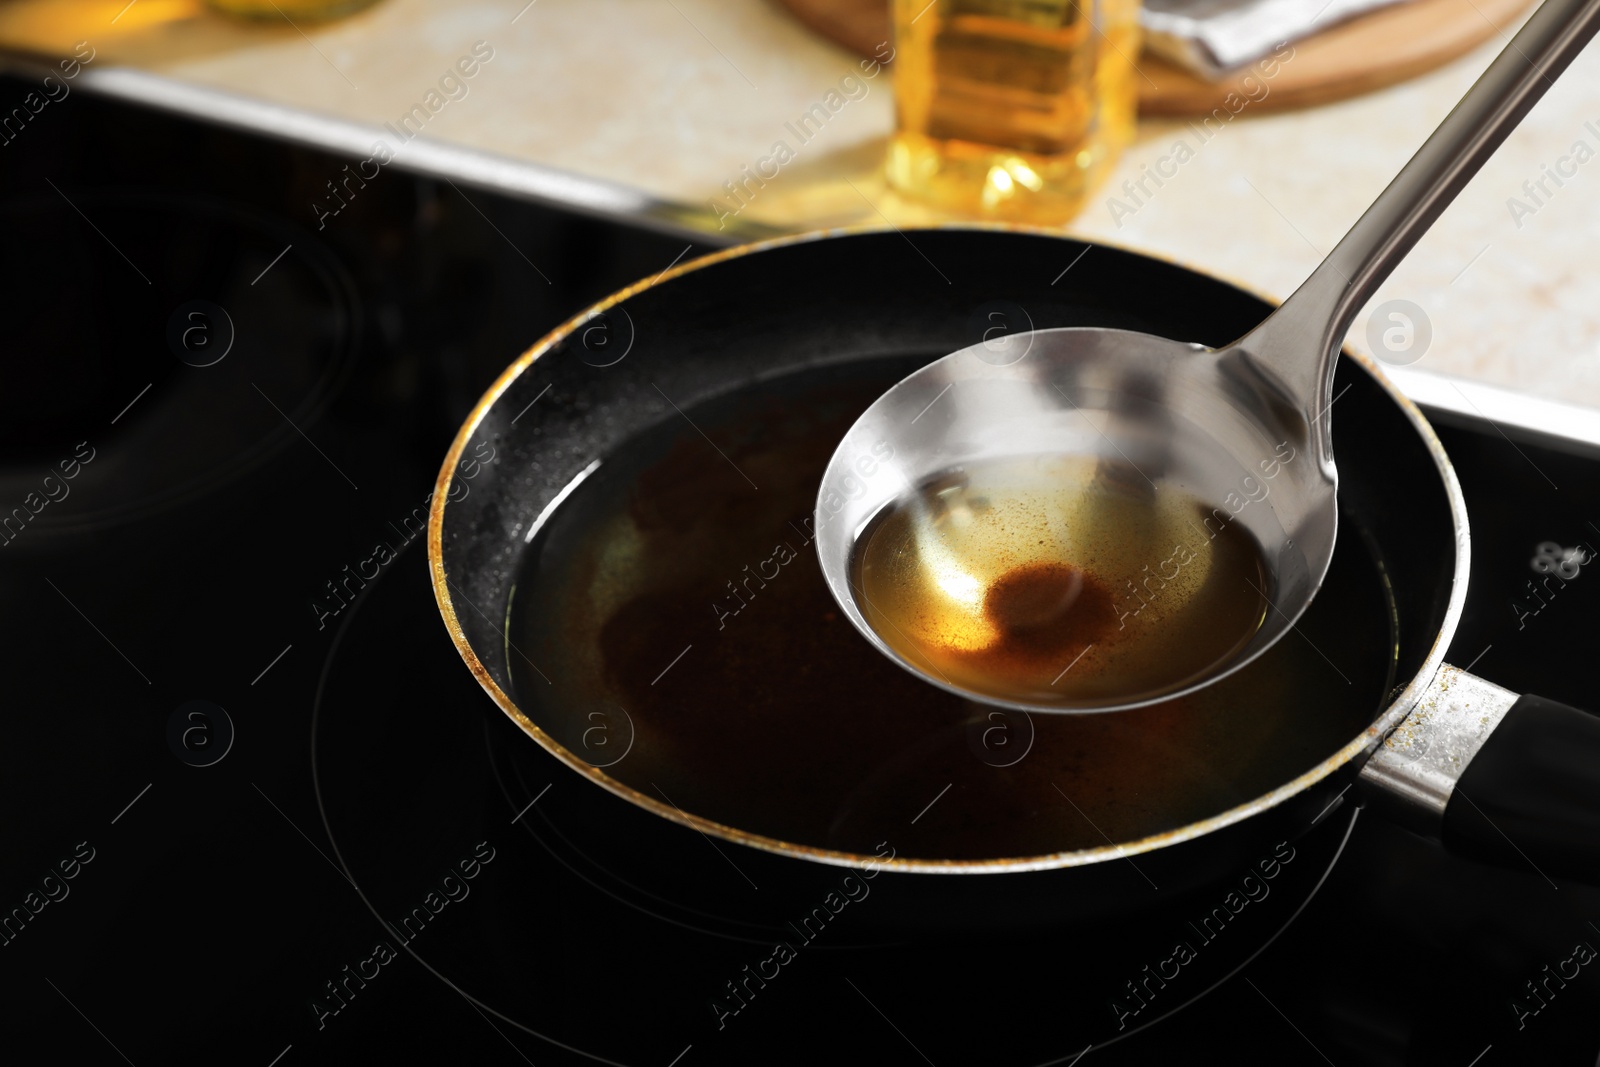 Photo of Ladle with used cooking oil over frying pan on stove